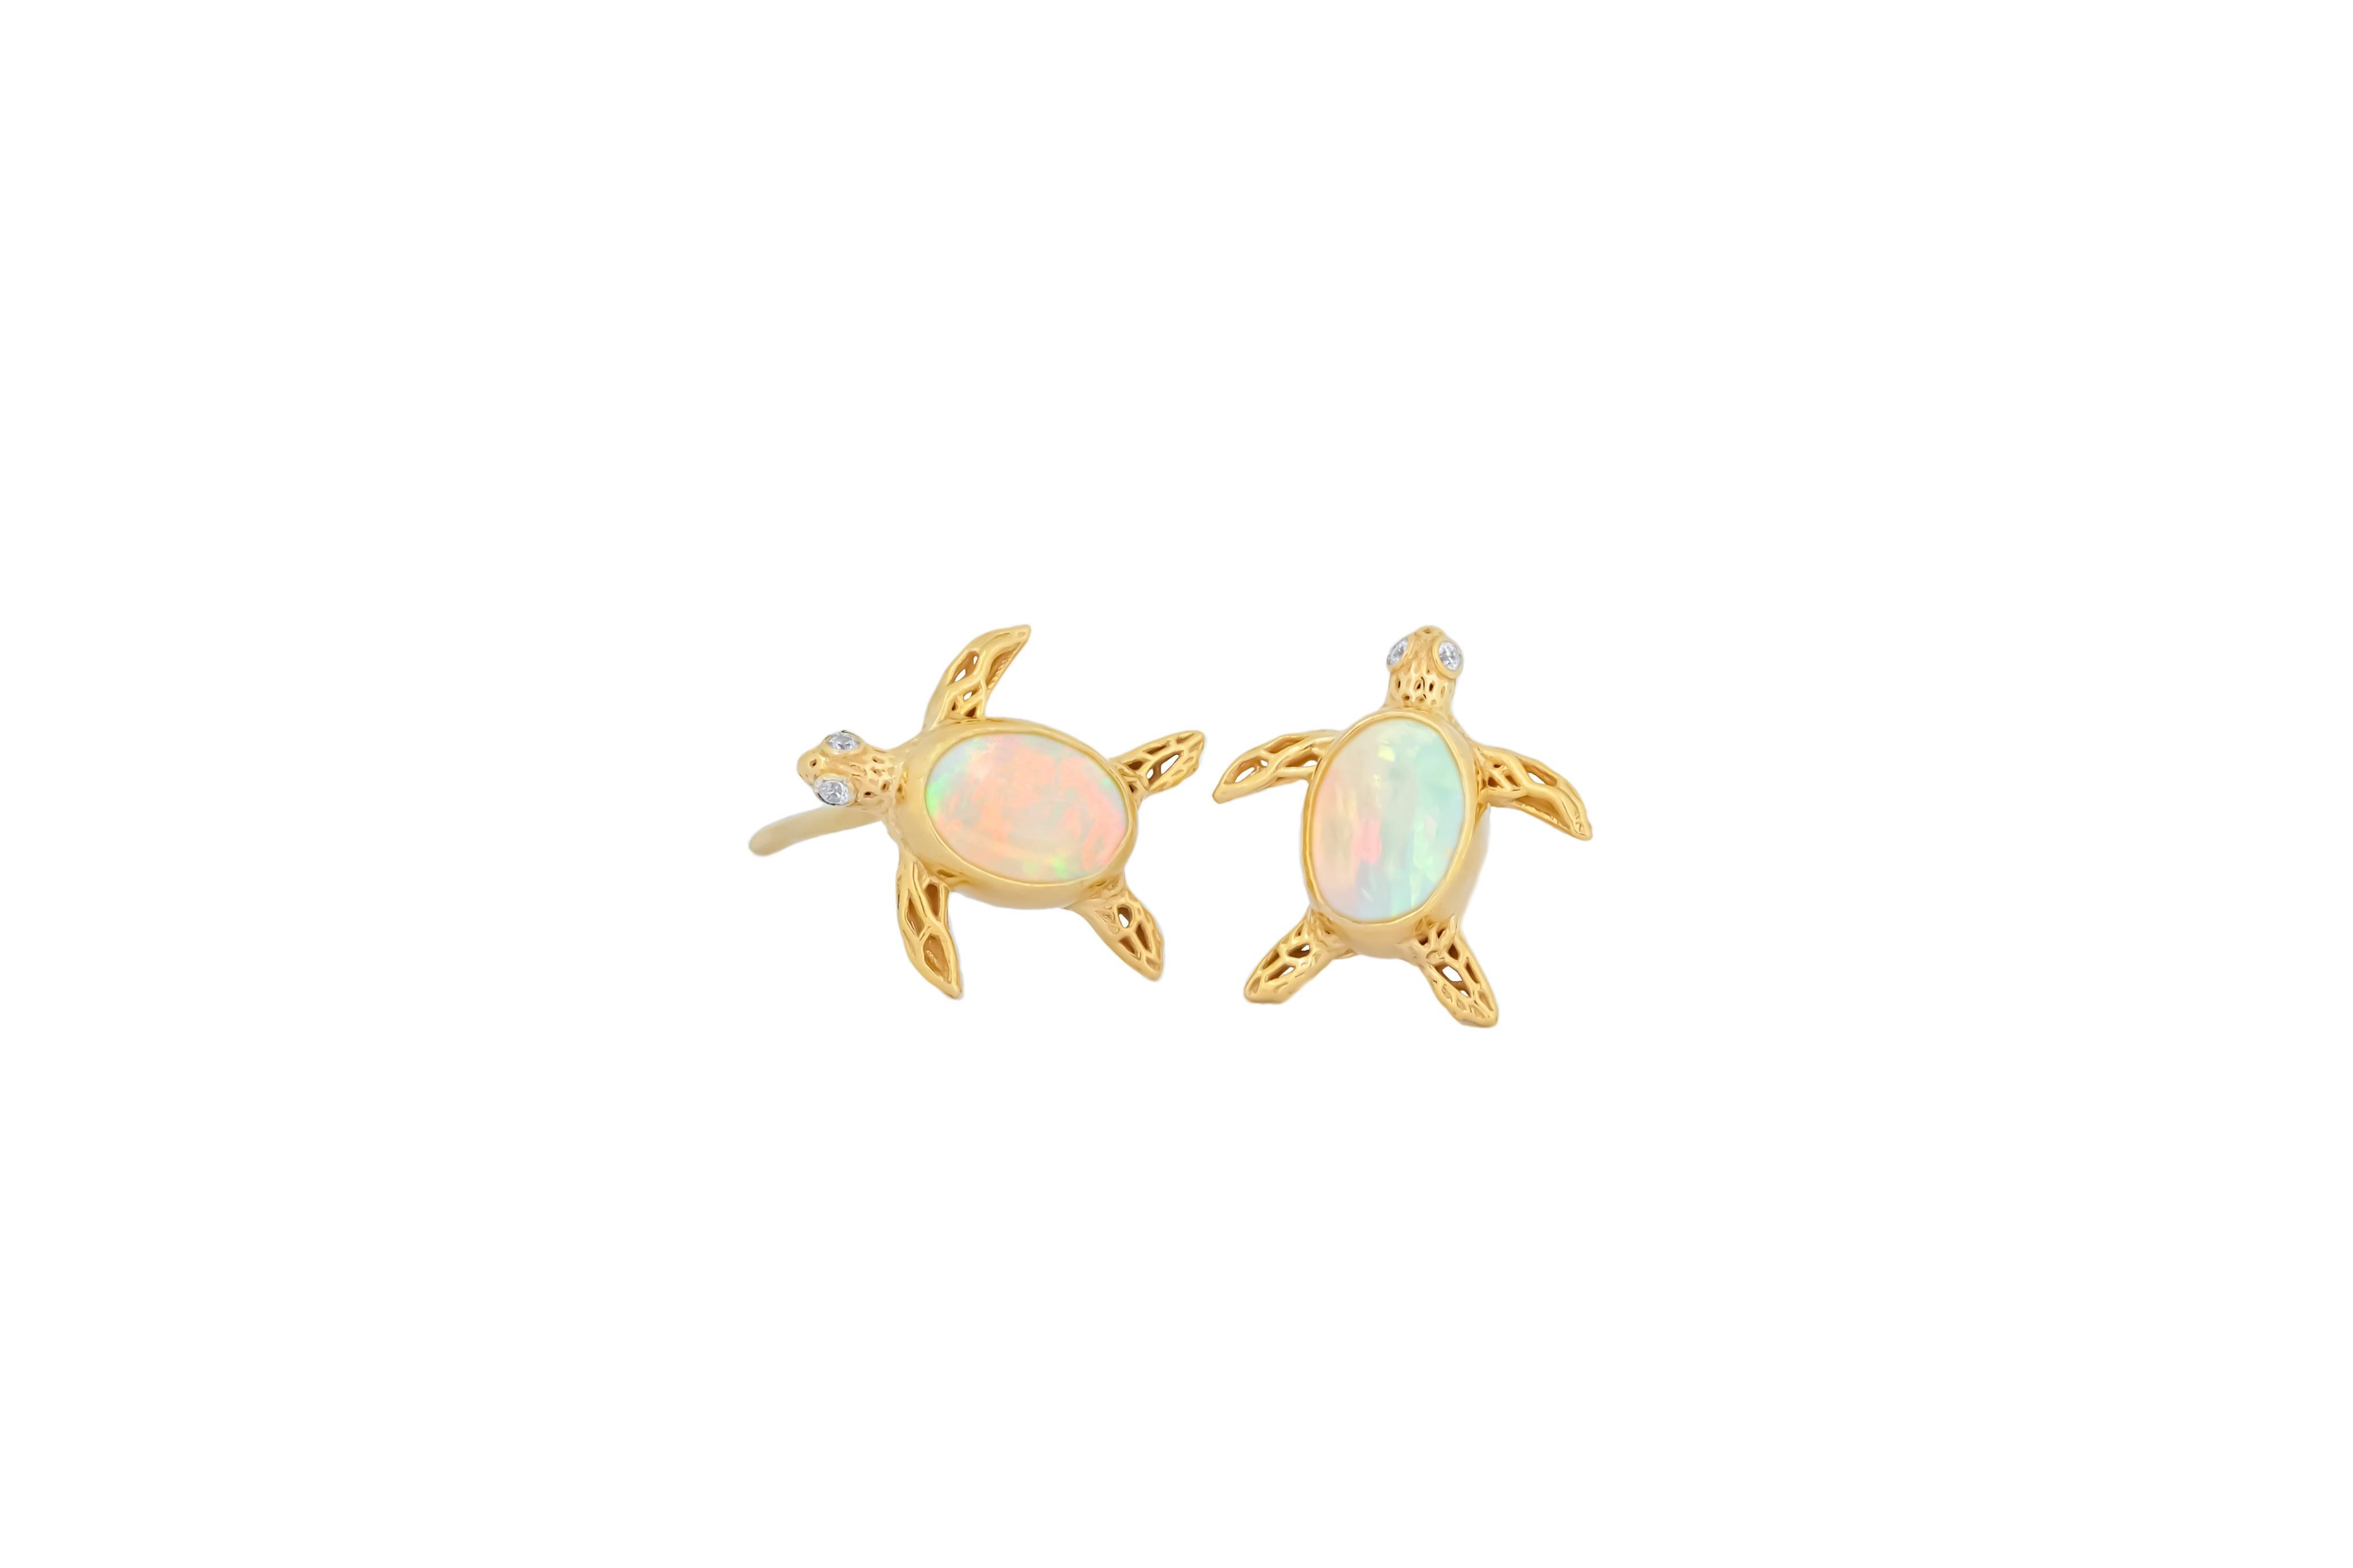 Modern Fish and turtle earrings studs